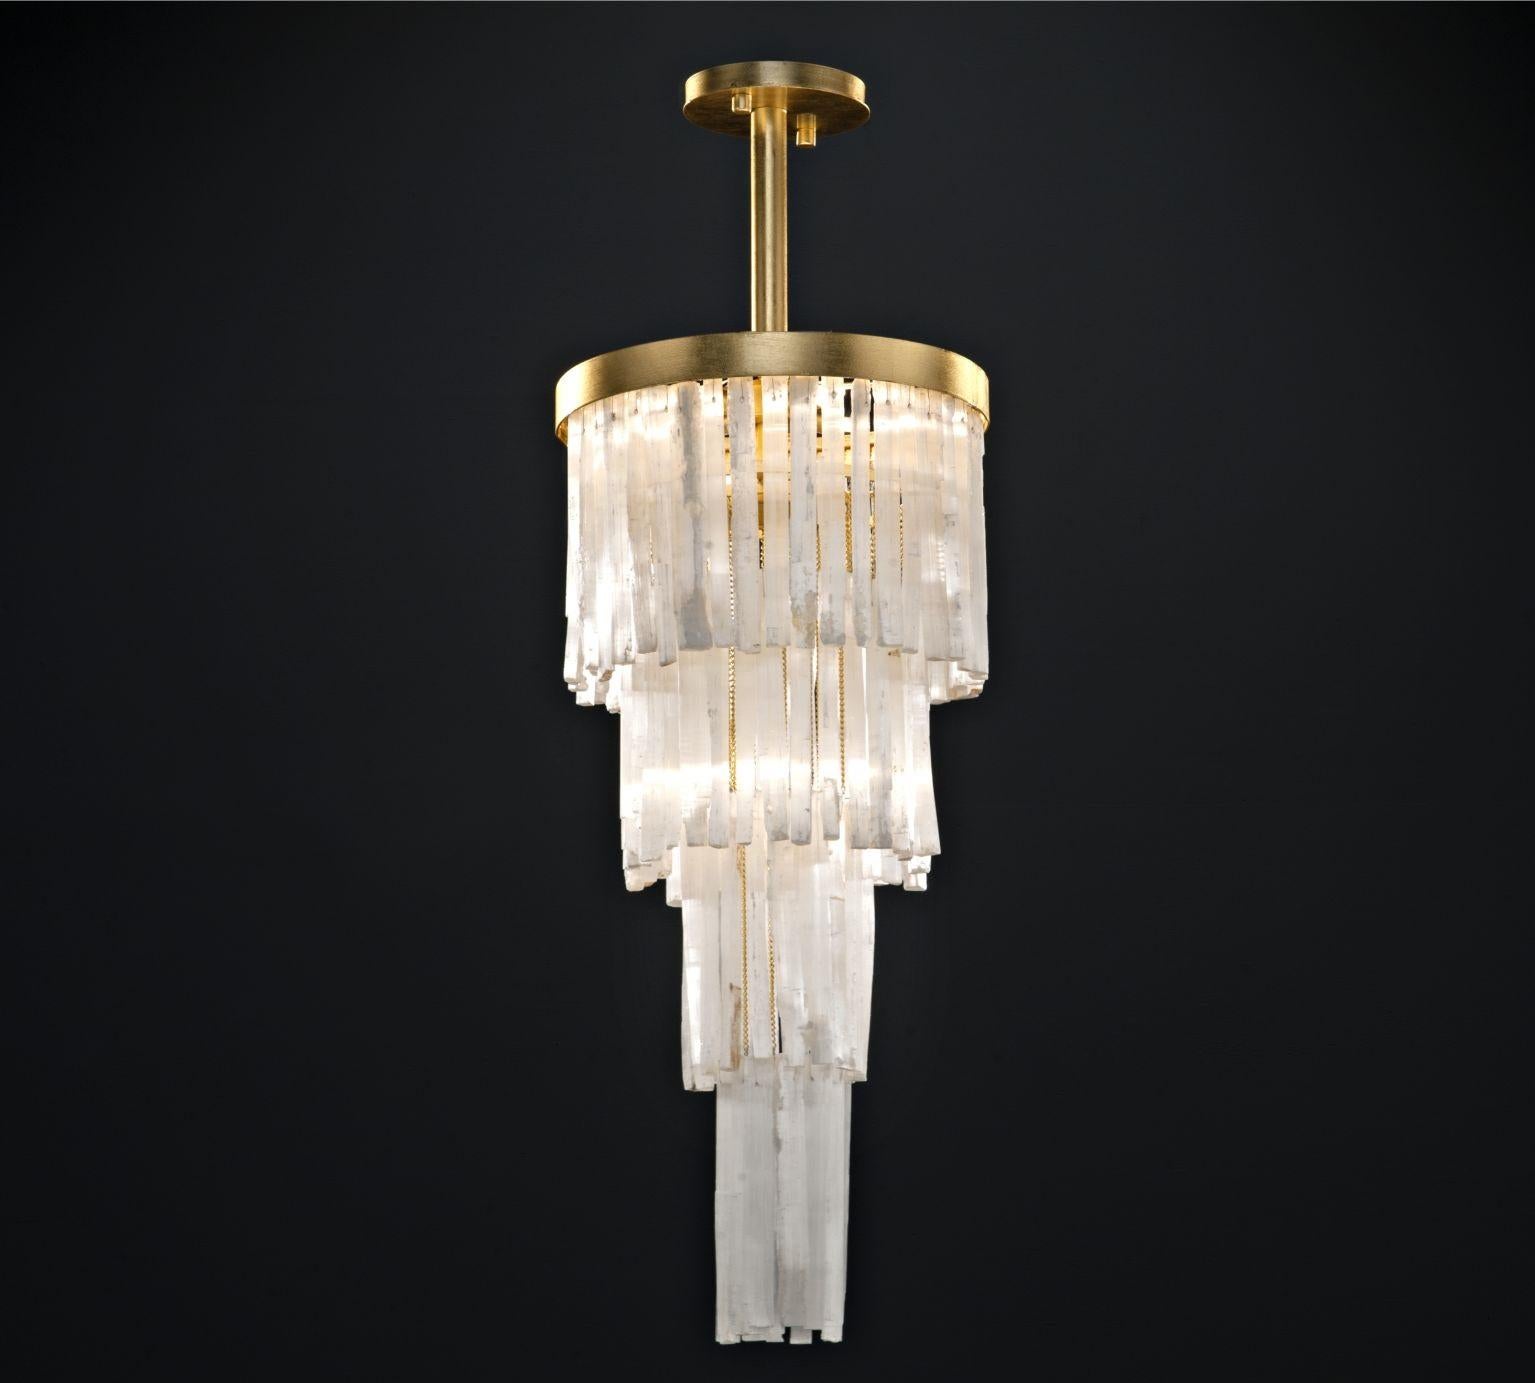 Selenite chandelier by Aver
Dimensions: D 38 x H 75 cm.
Materials: Selenite, metal.
Available in other sizes.

Designed by Marcele Muraro, for Aver, the collection is produced with natural Moroccan selenite and inspired by the city of